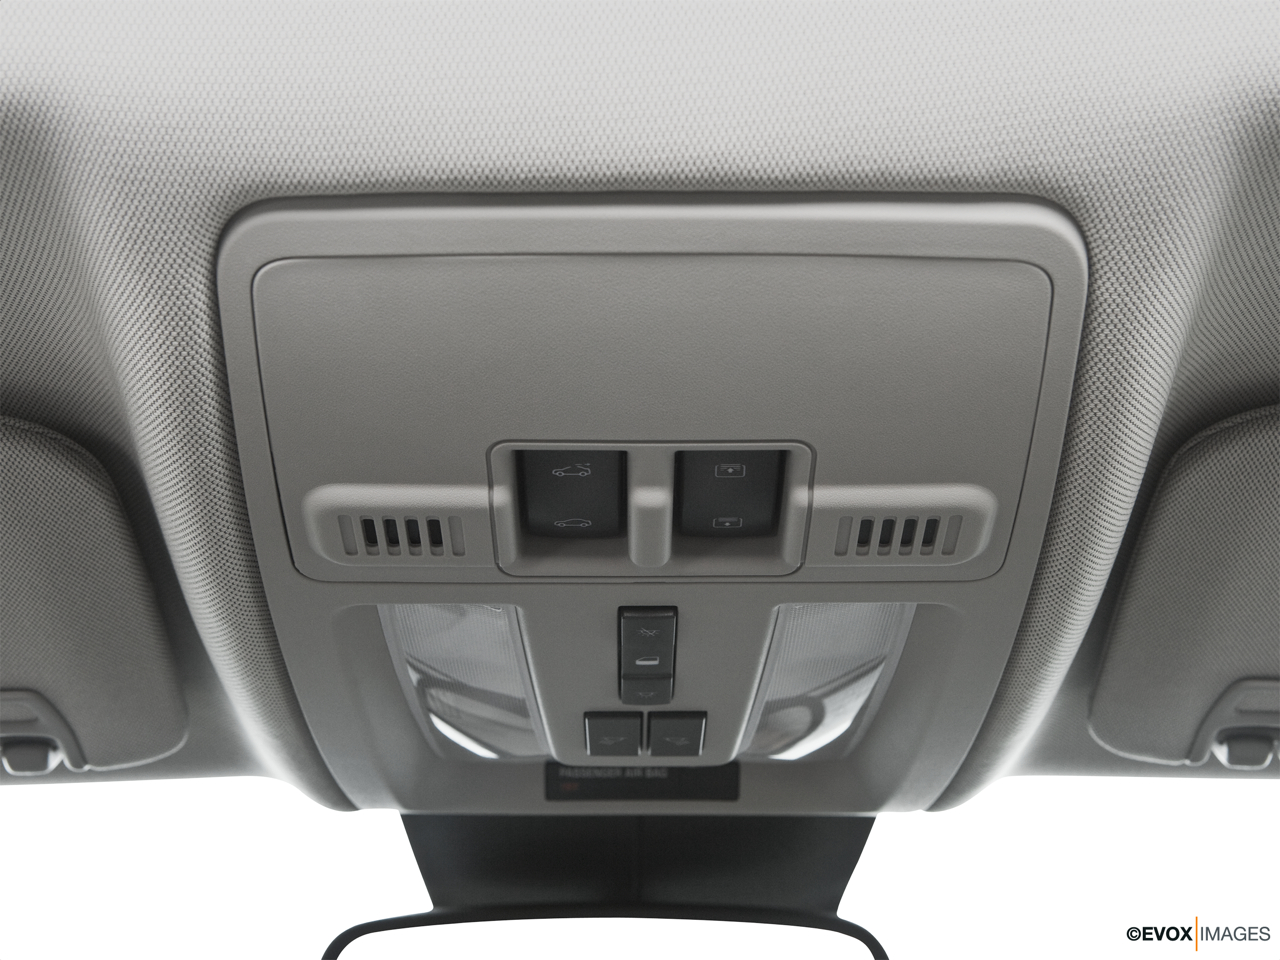 2010 Cadillac SRX Crossover Premium Collection Courtesy lamps/ceiling controls. 